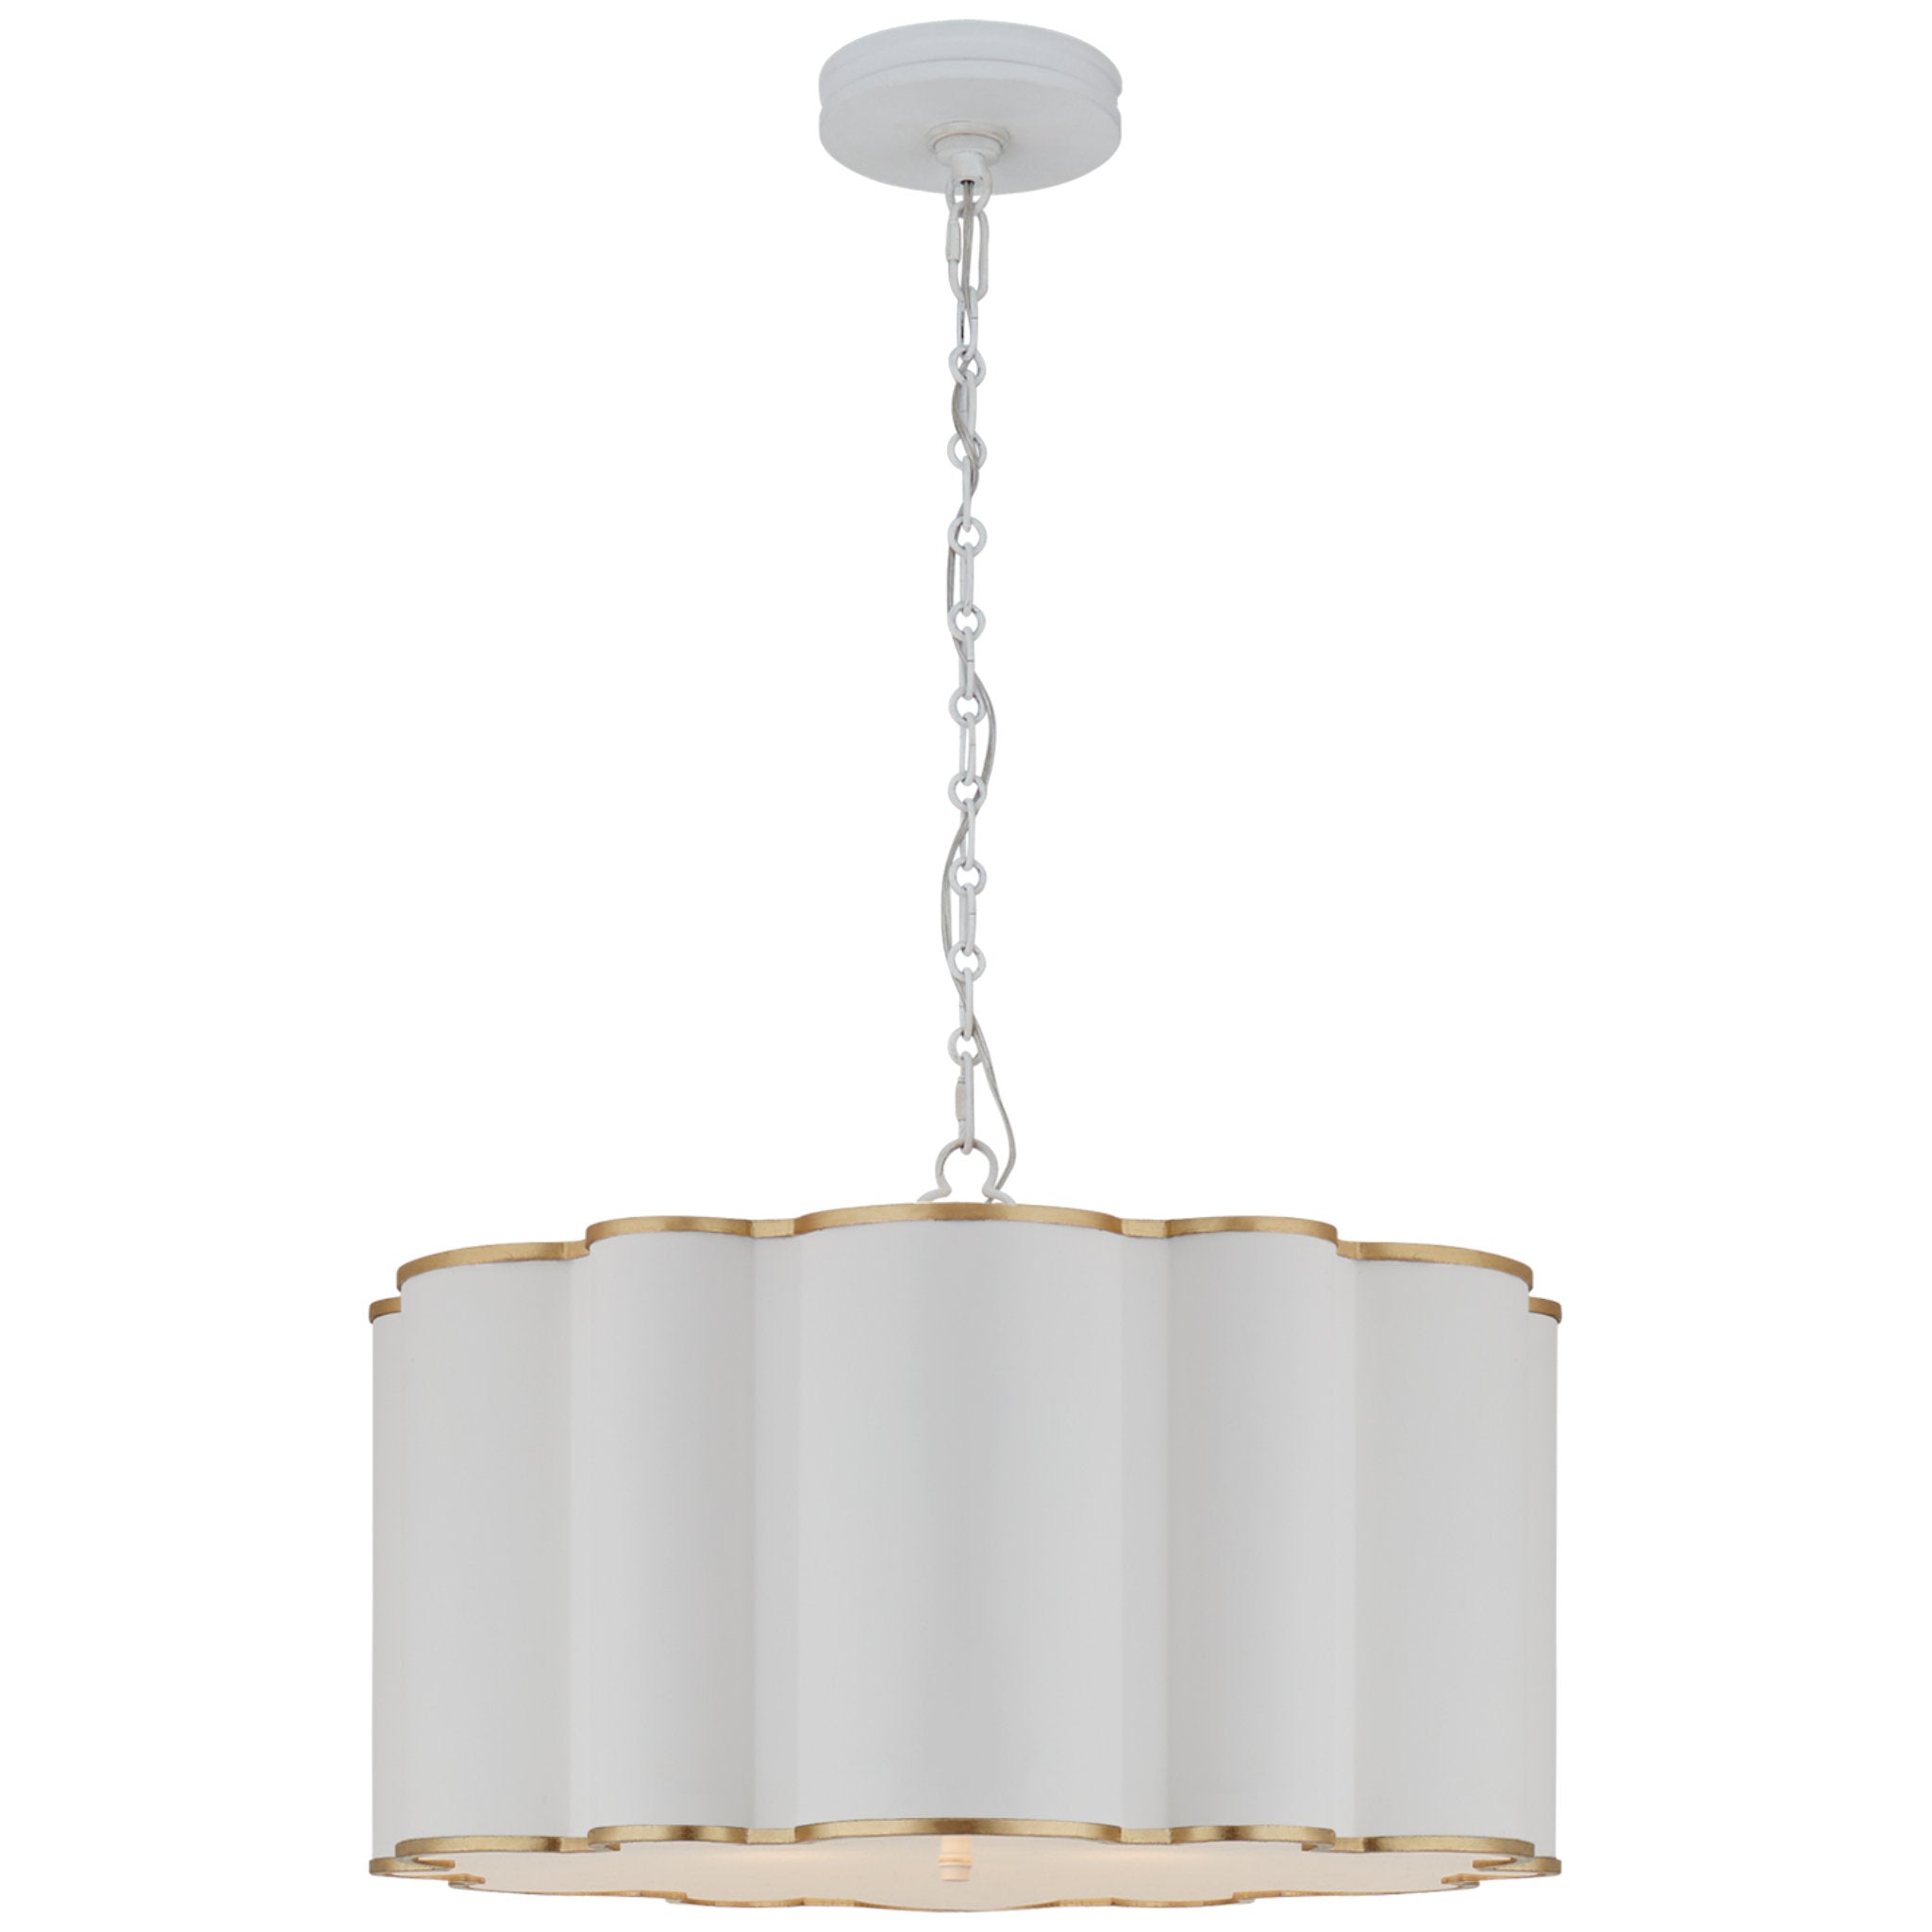 Alexa Hampton Markos Large Hanging Shade in White and Gild with Frosted Acrylic